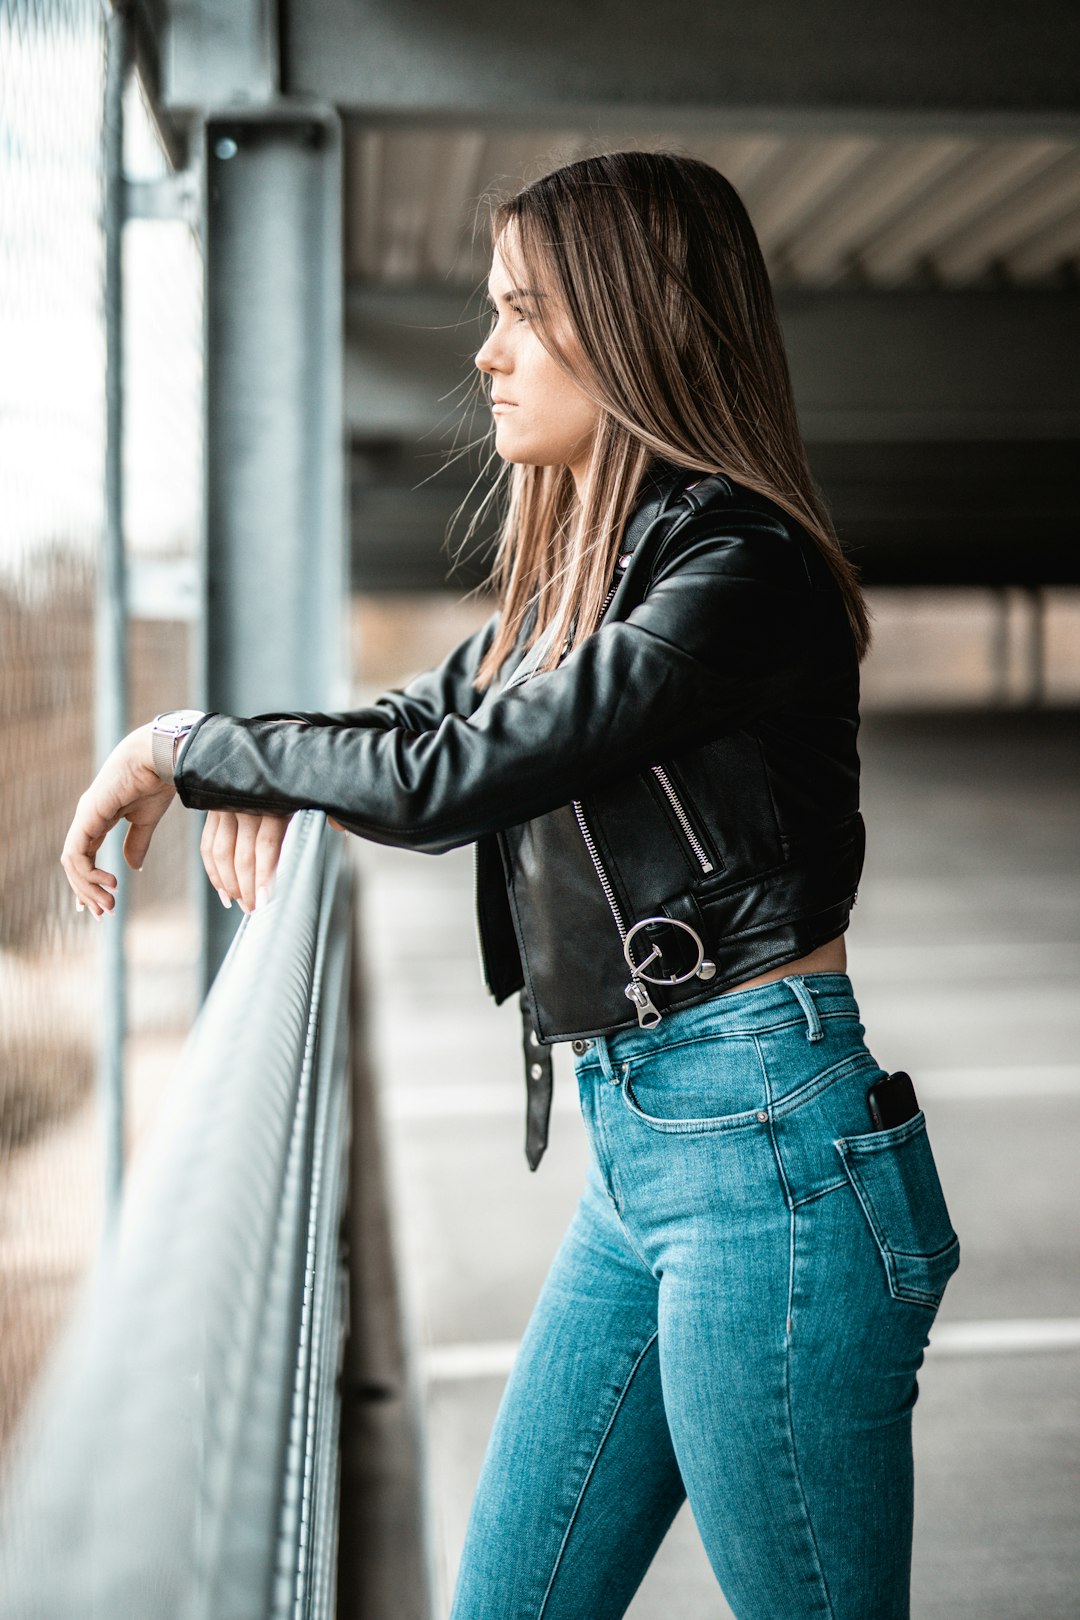 woman in black leather jacket and blue denim jeans leaning on gray metal railings